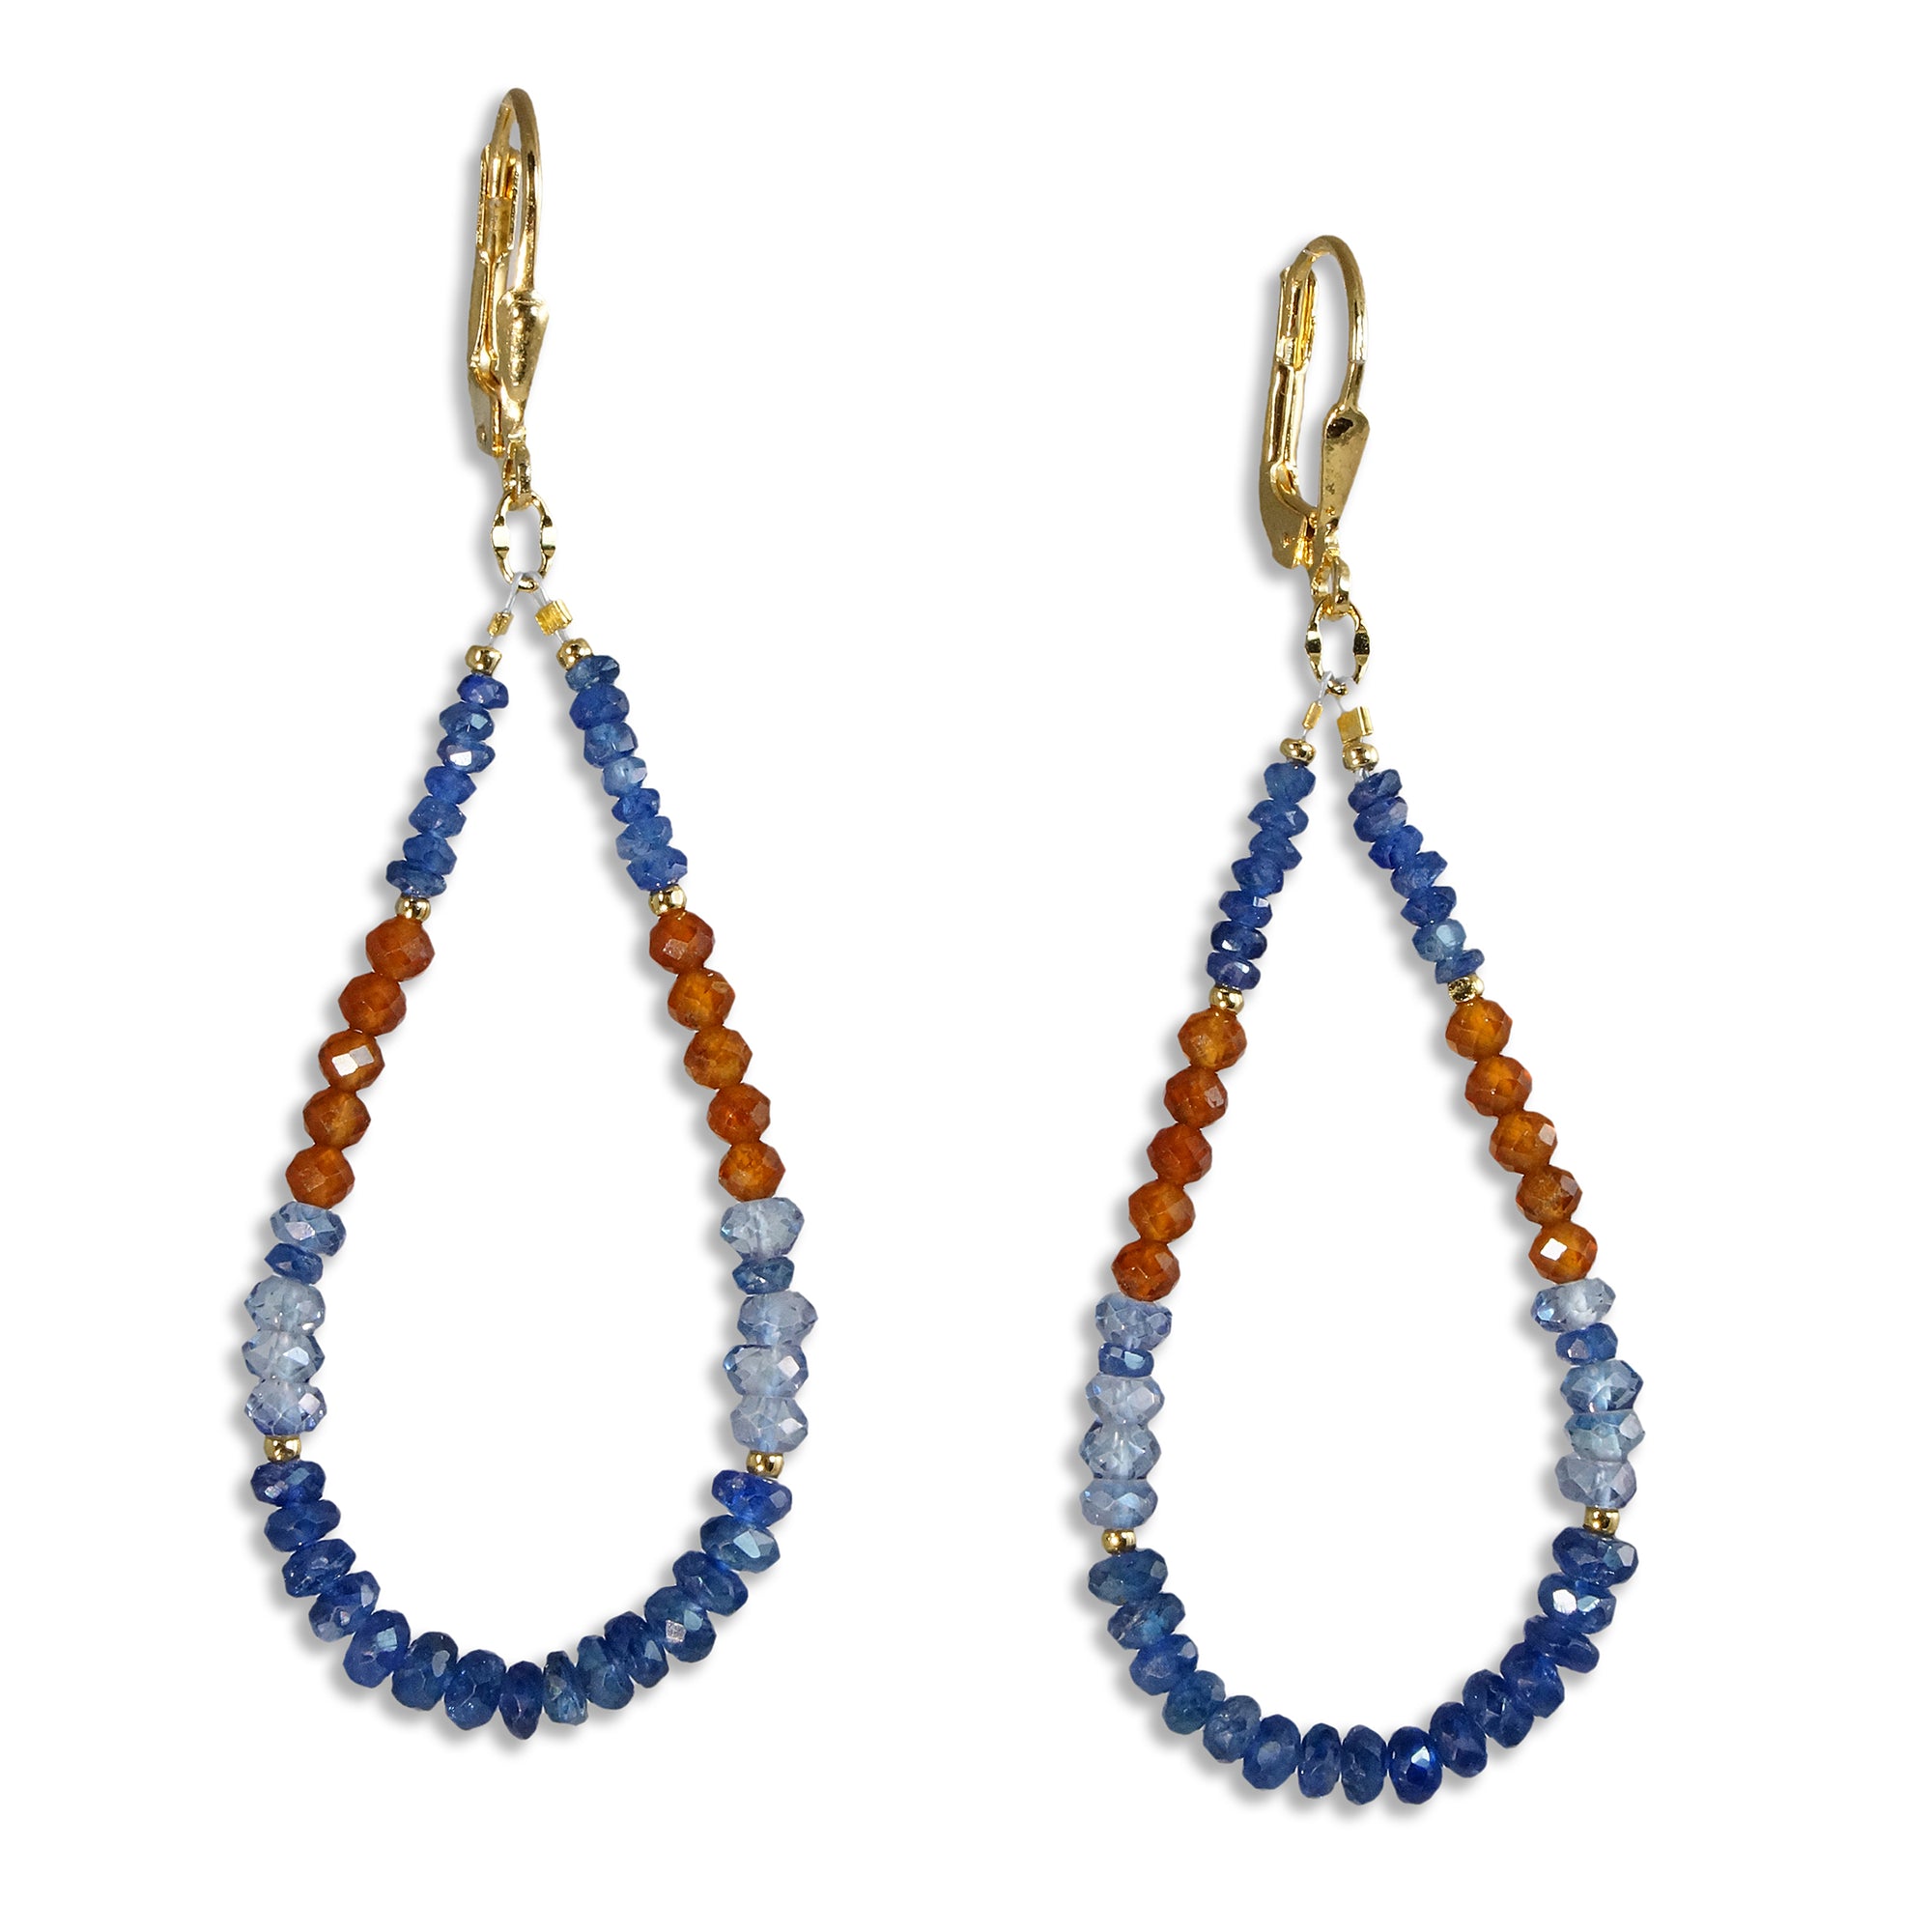 Gold Leverback Earrings with Sapphire, Hessonite, Tanzanite